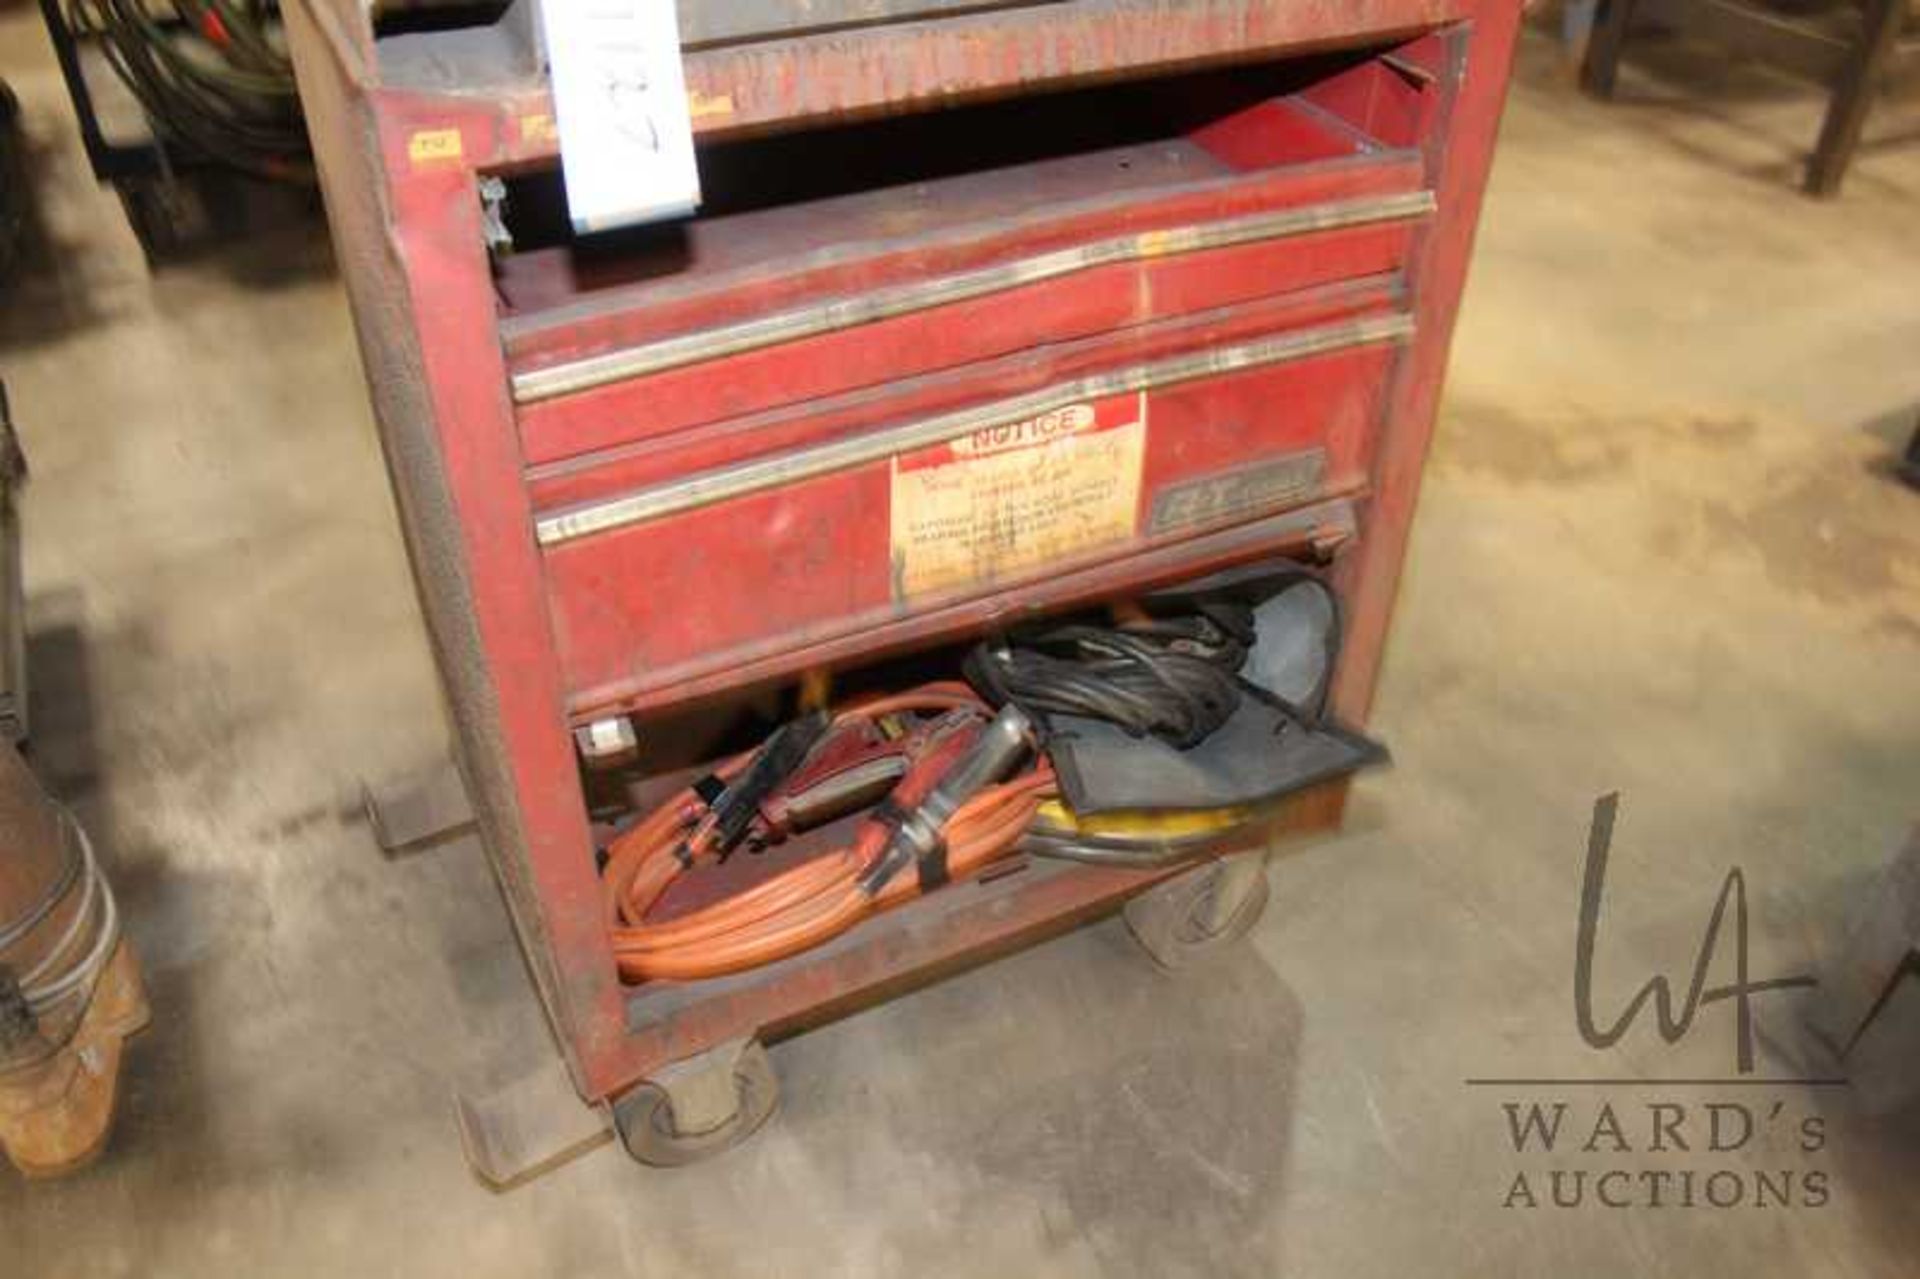 A-T TOOL CABINET & BOOSTER CABLES